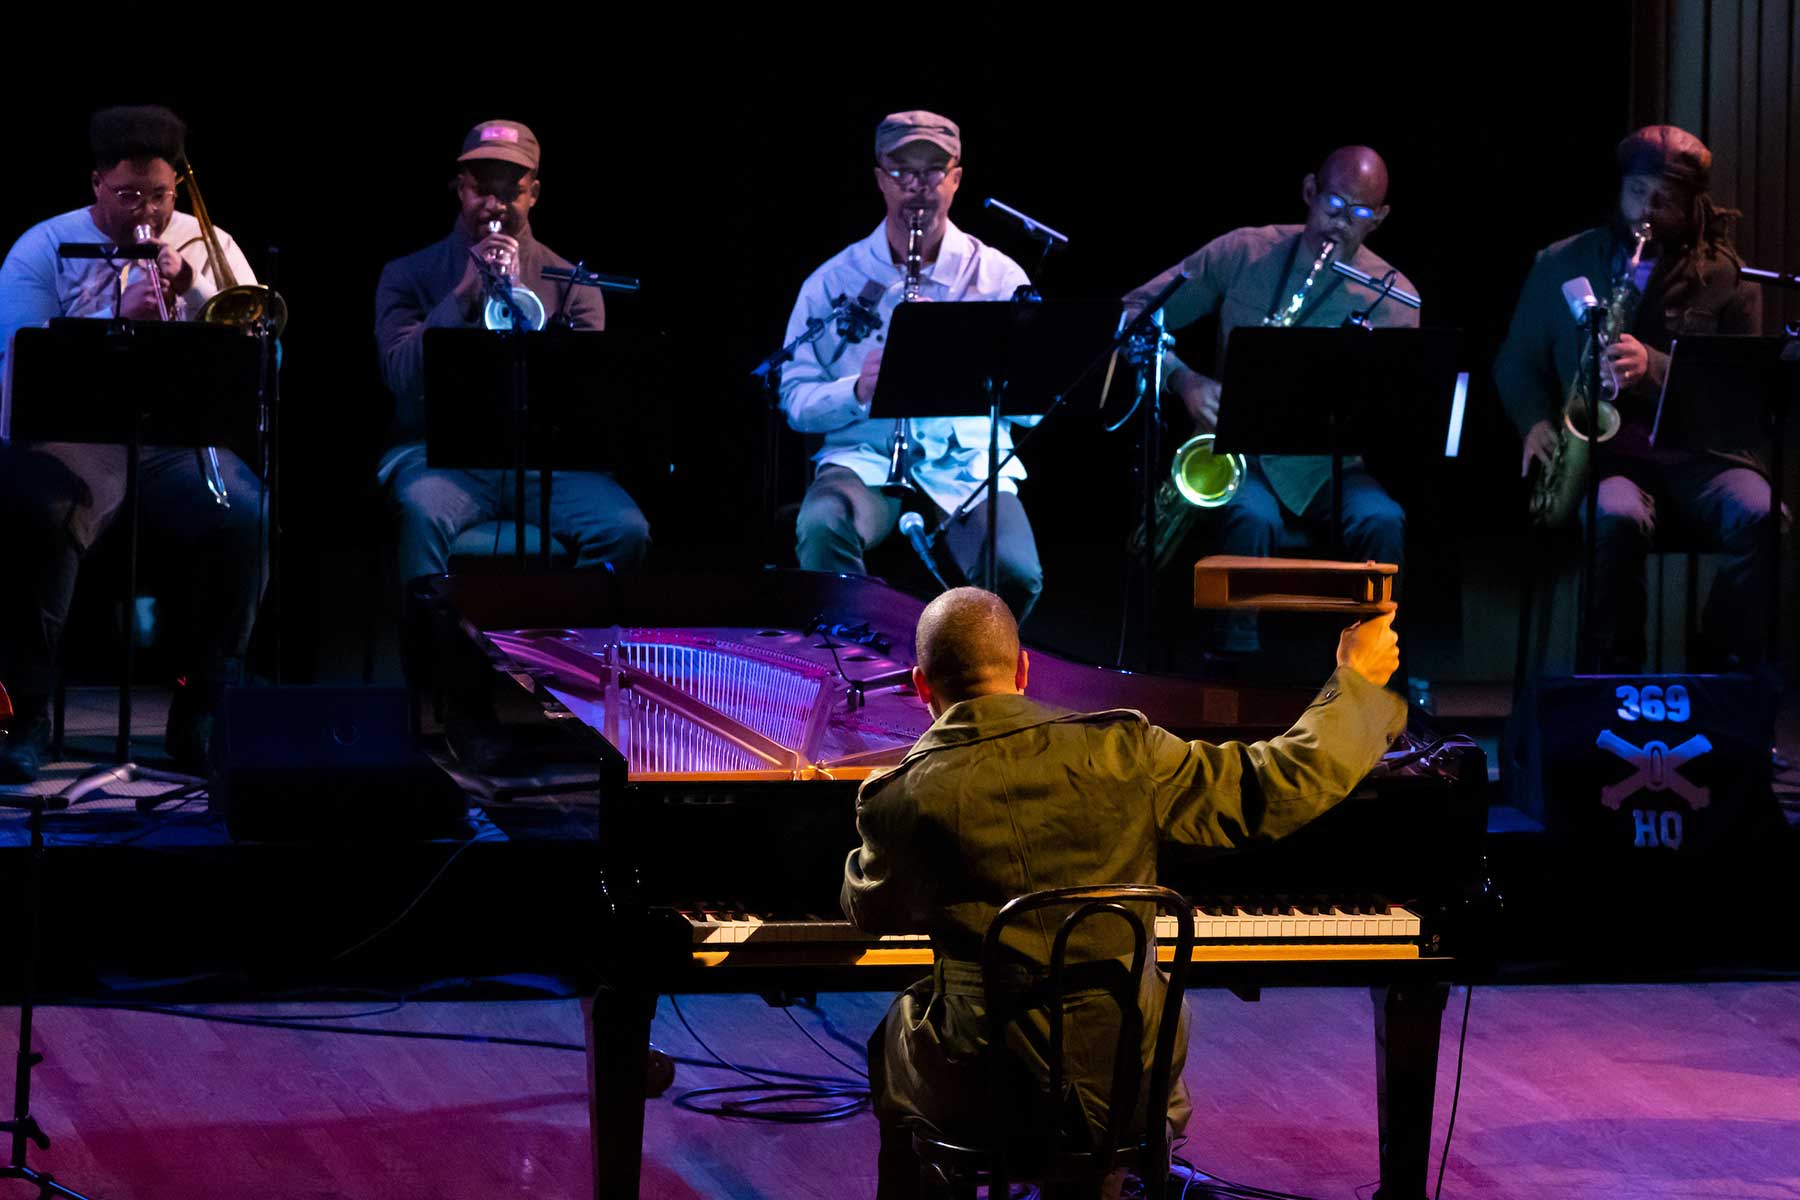 A man plays a piano facing a line of men playing wind instruments.